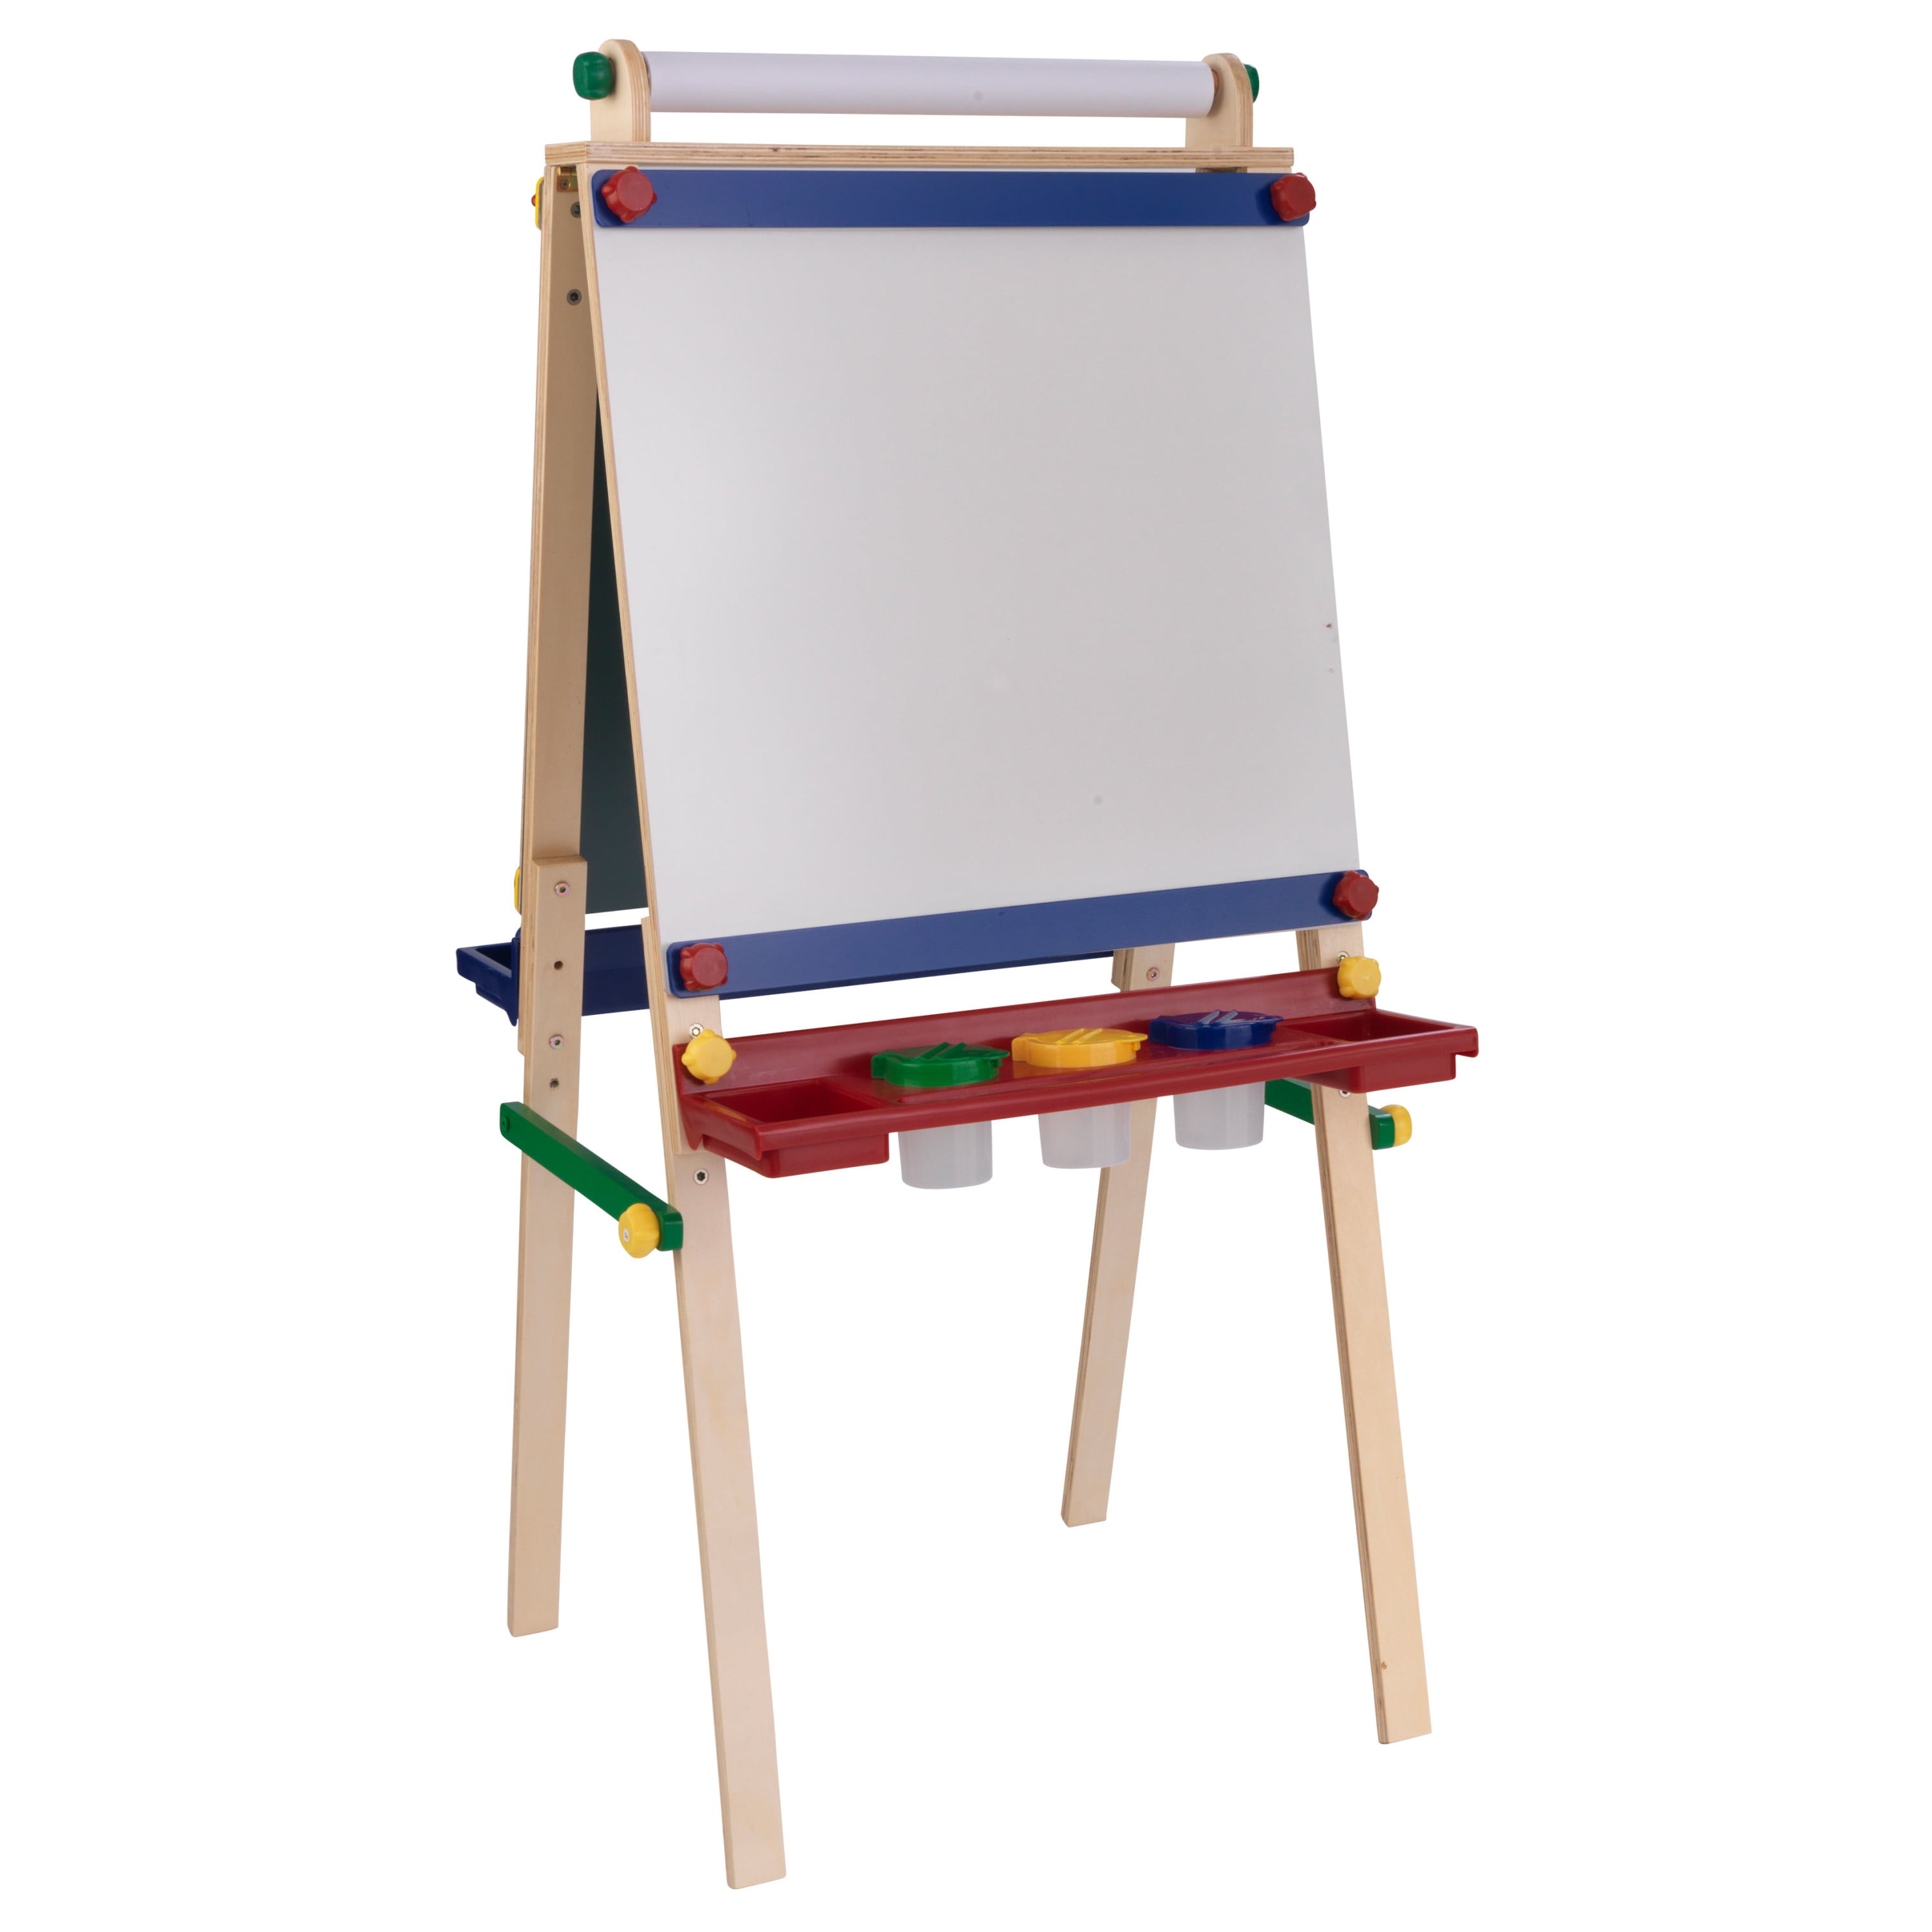 YOUNIS Wooden Kids Easel Double Sided Standing Art Easel for Children with Paper Roller and Accessories 